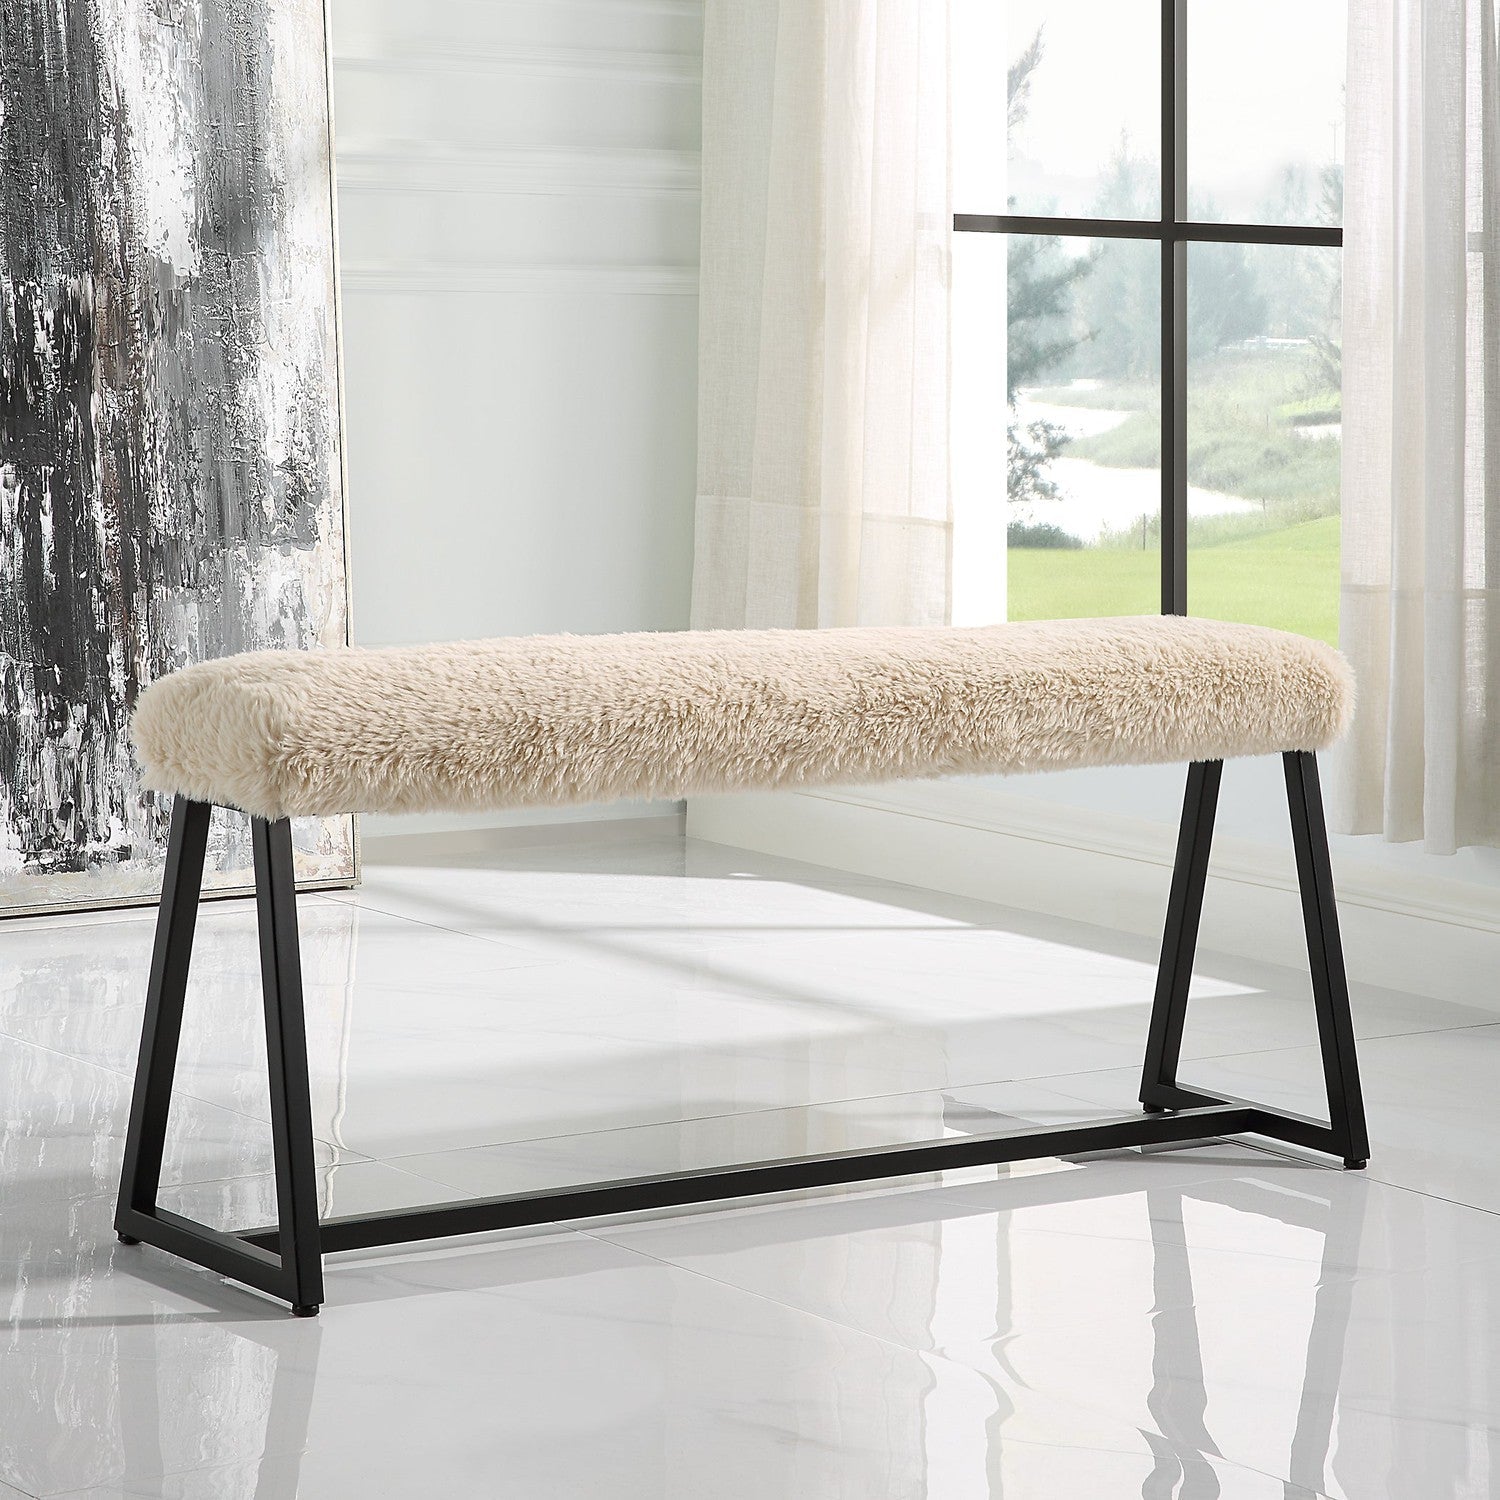 Taupo Sheepskin Bench-Uttermost-UTTM-23056-Benches-2-France and Son